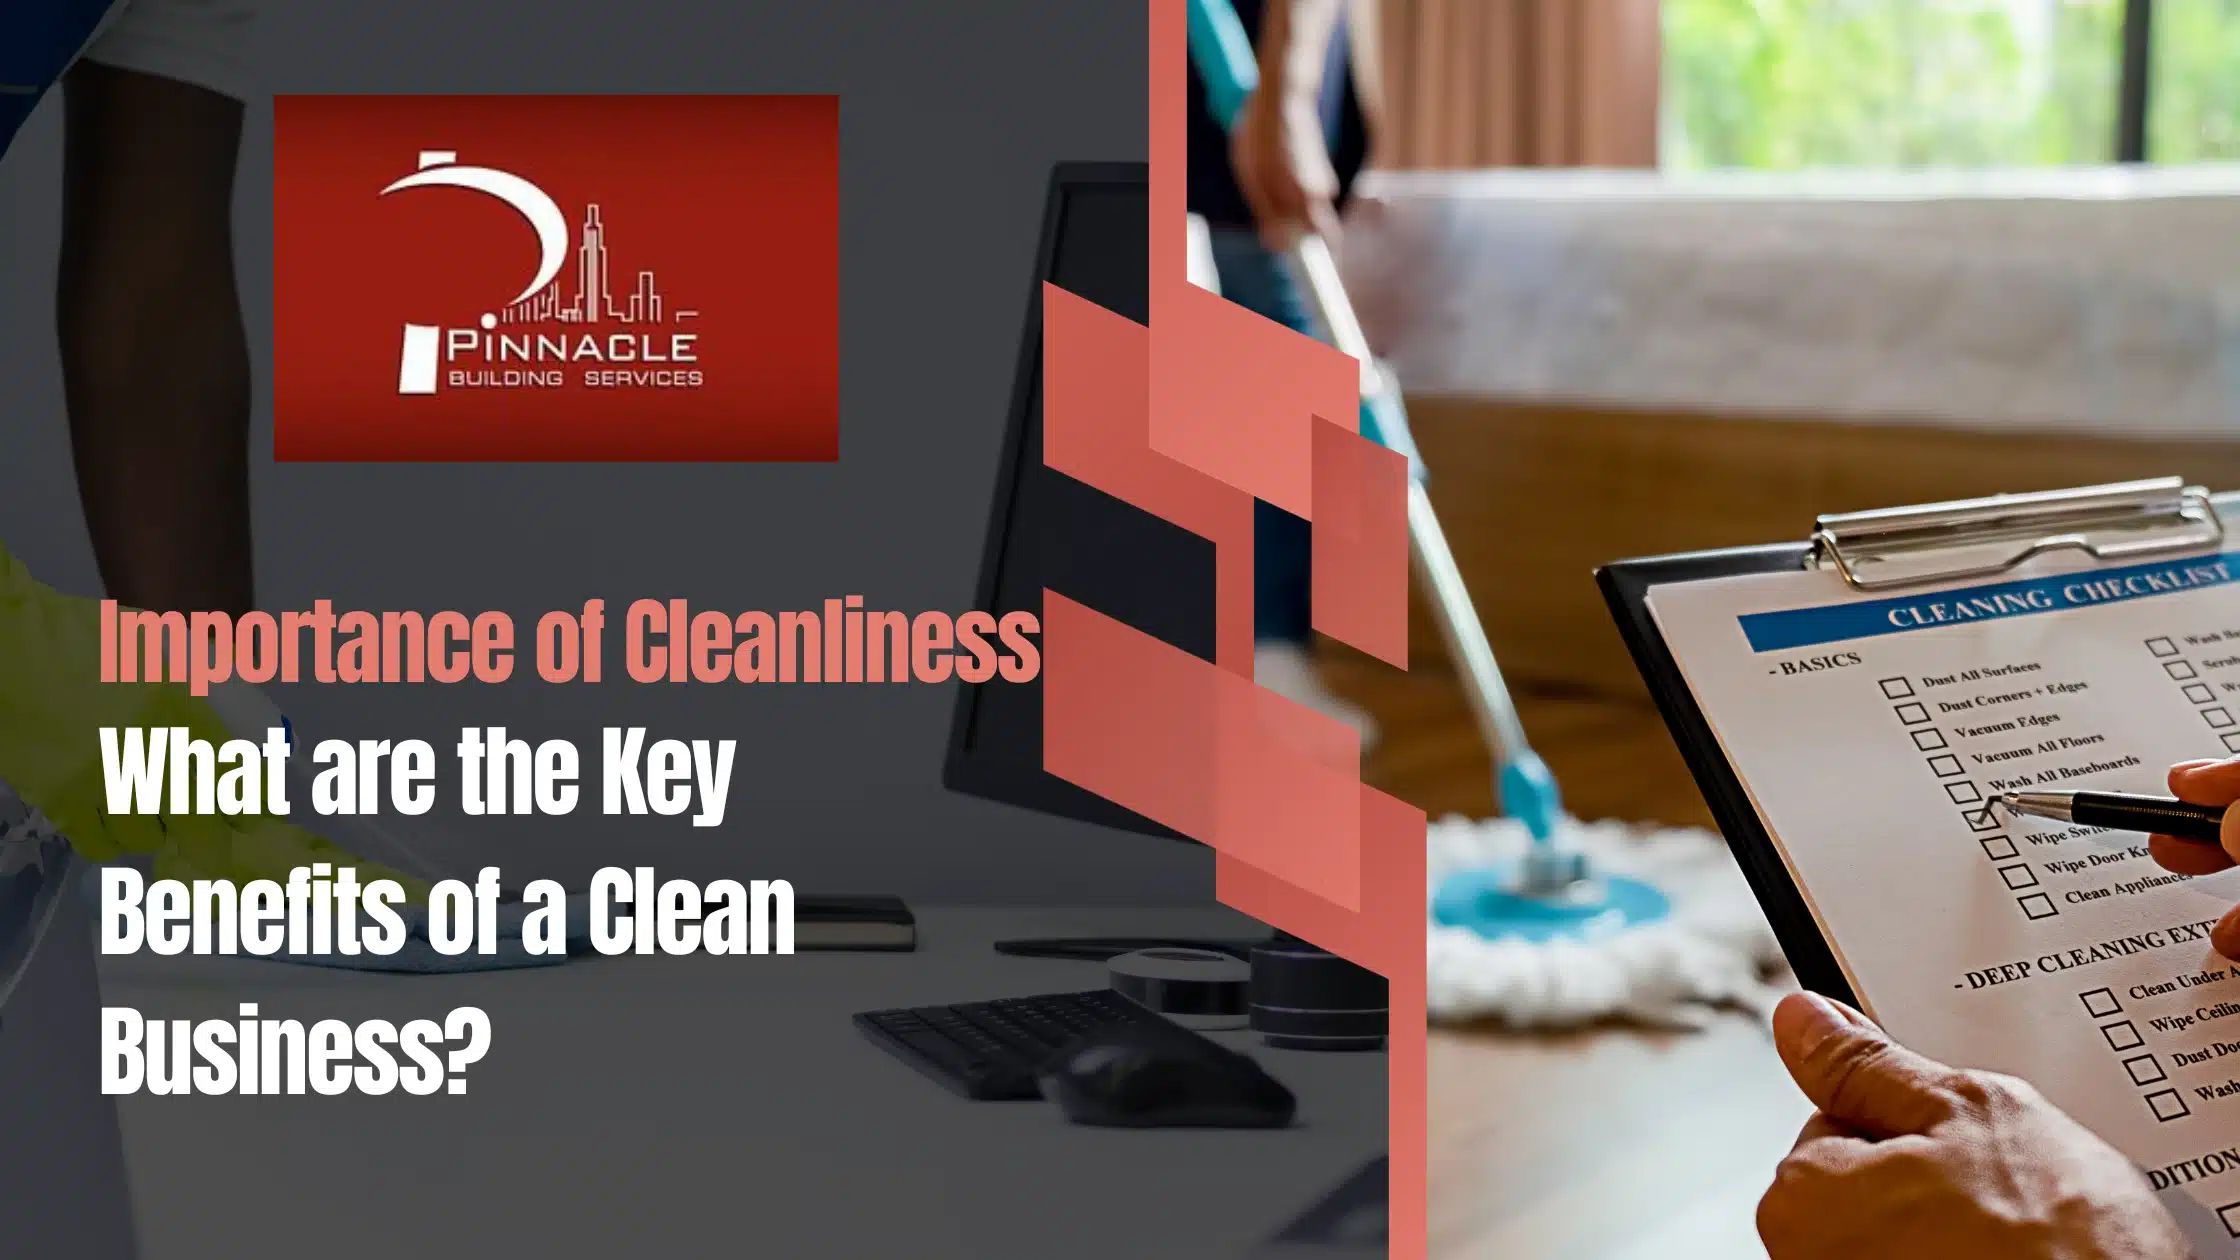 Importance of Cleanliness